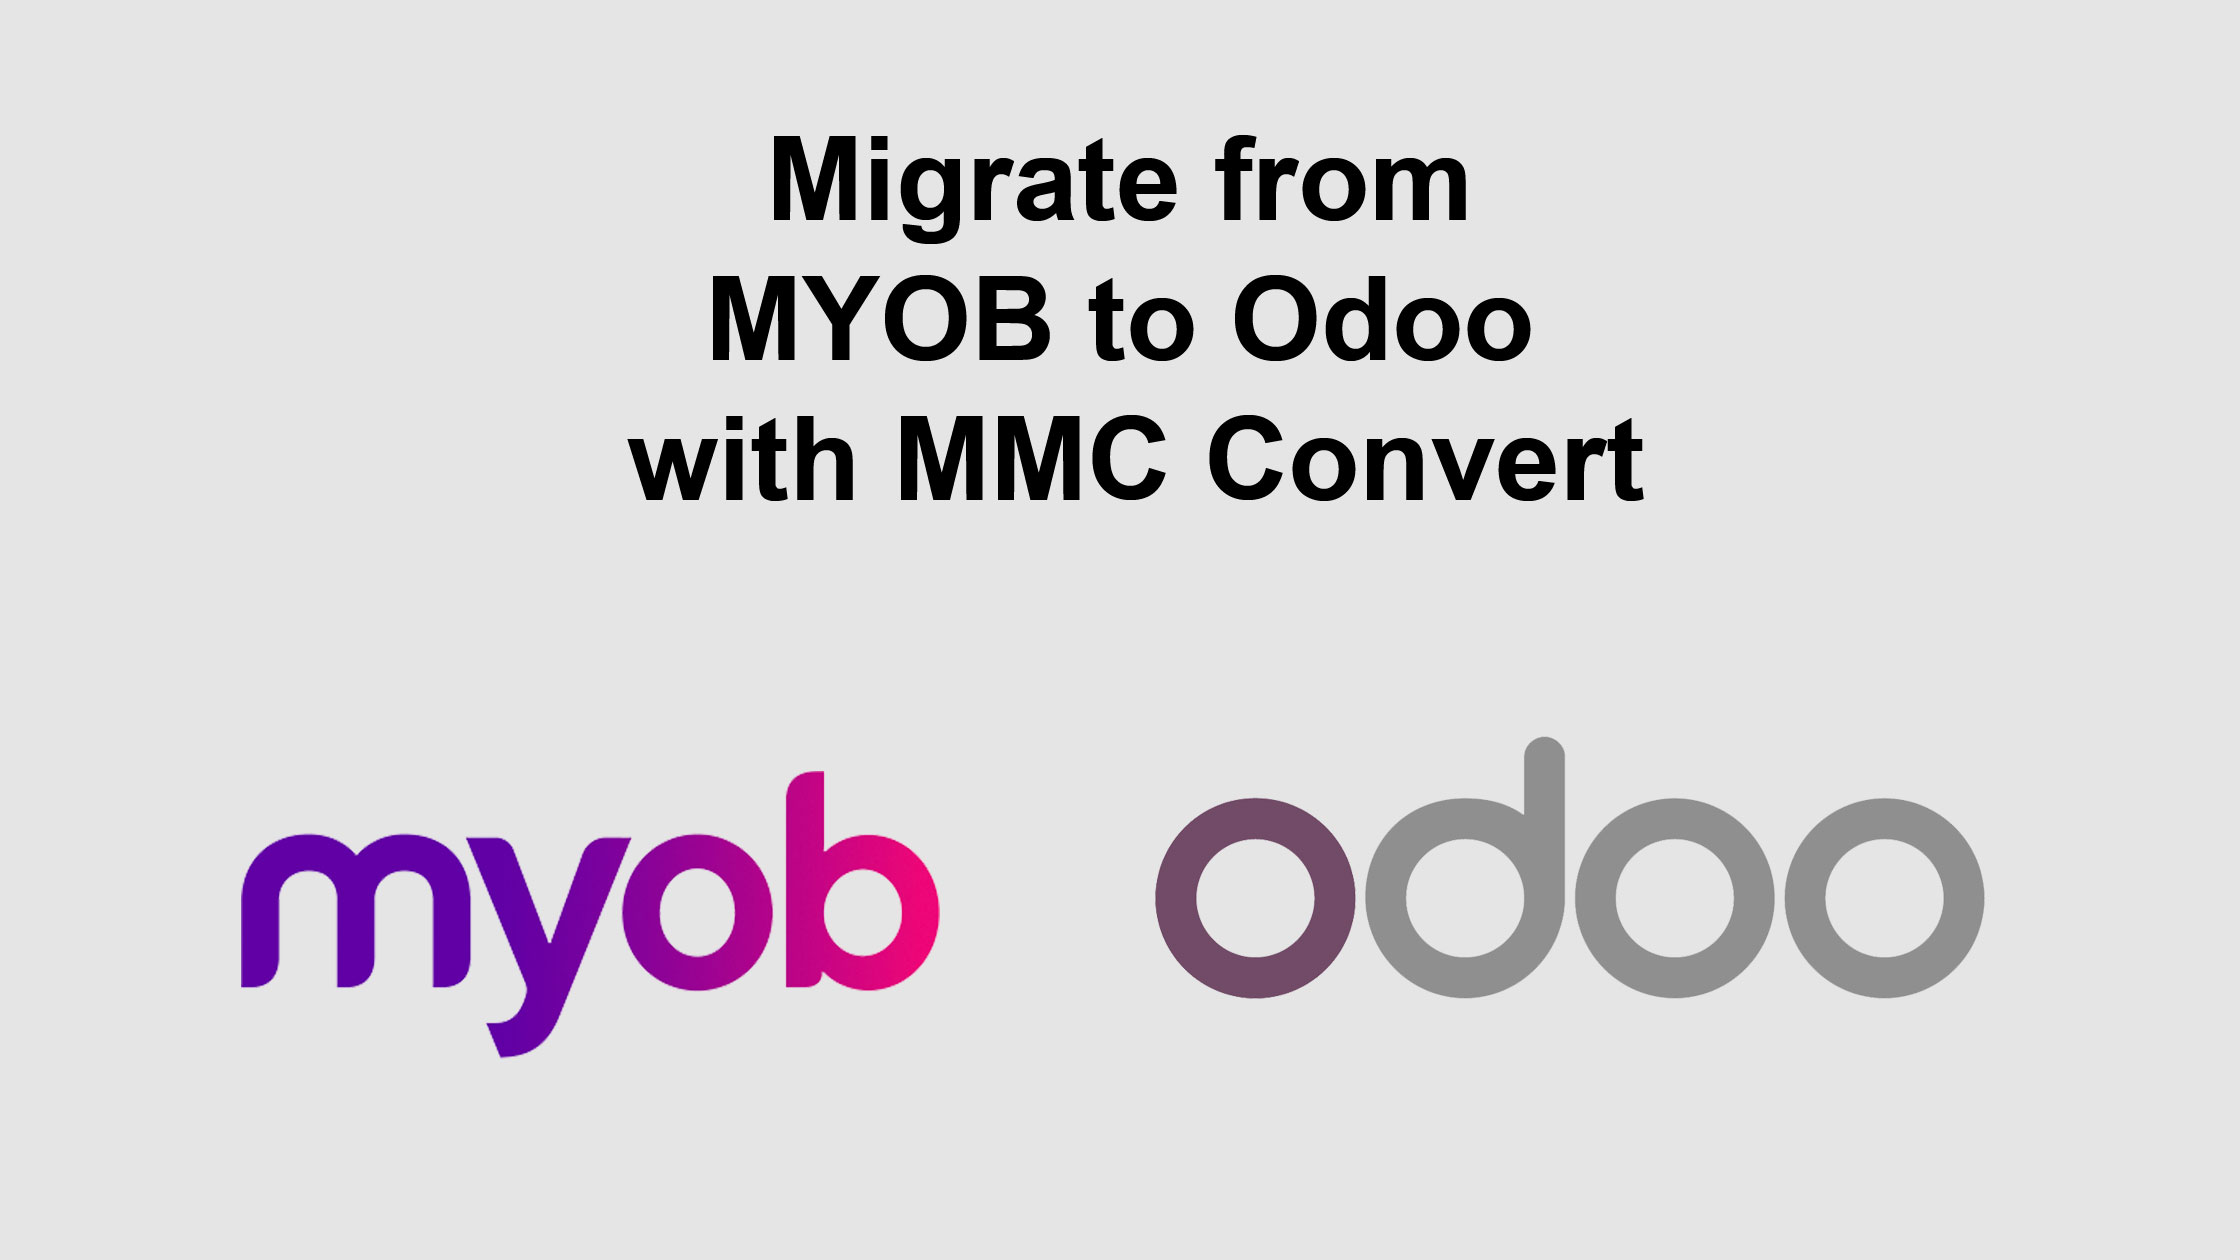 Migrate from MYOB to Odoo with MMC Convert